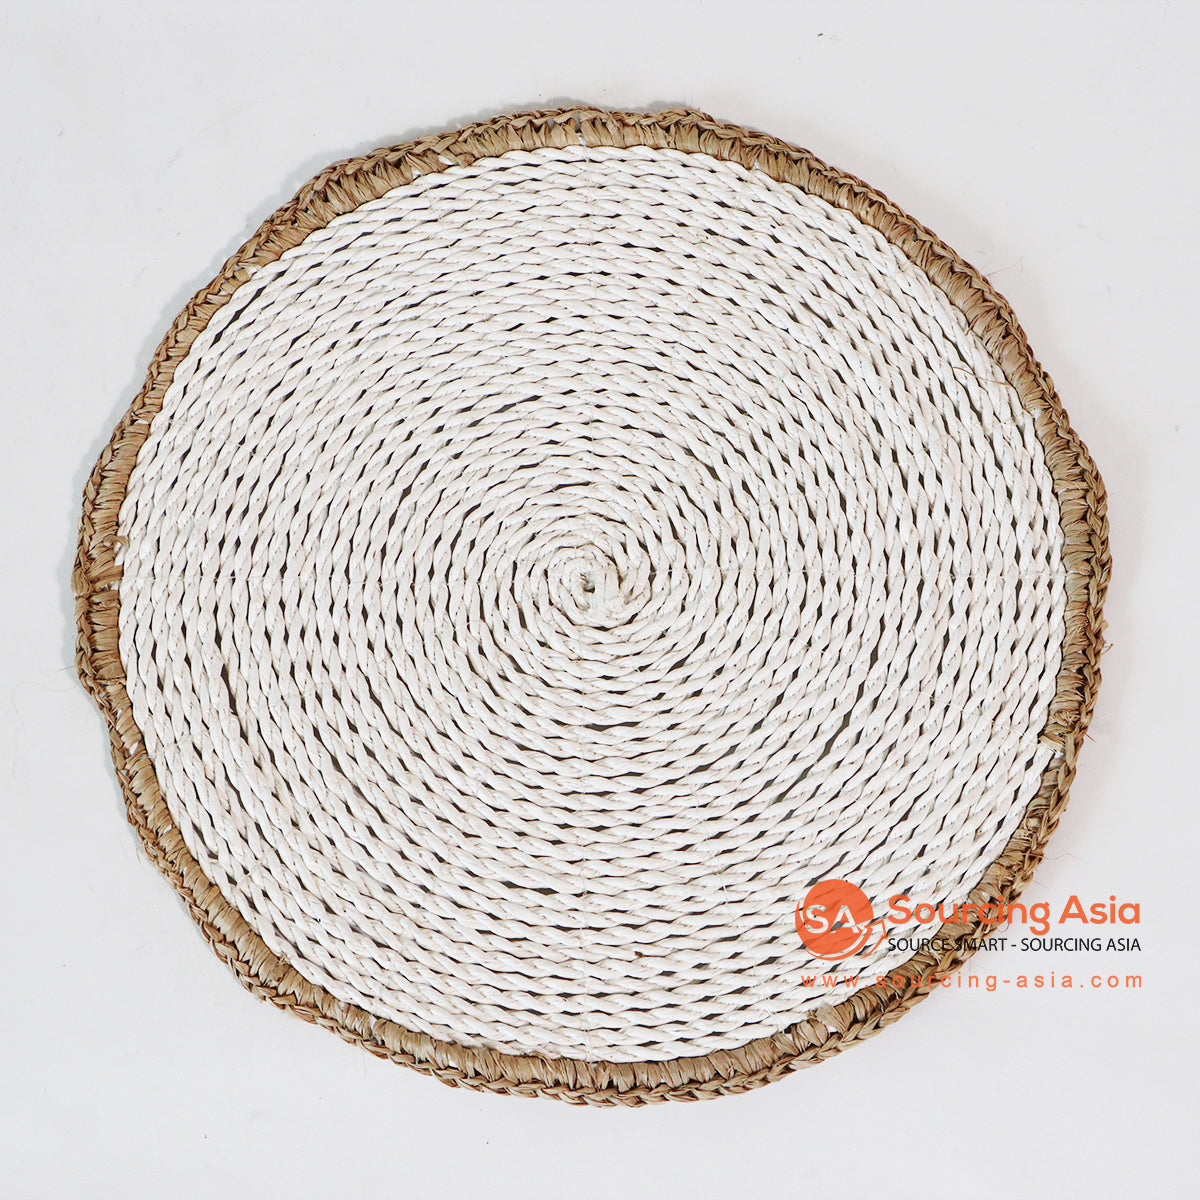 MTIC031-2 BROWN AND WHITE WOVEN PLASTIC PLACEMAT